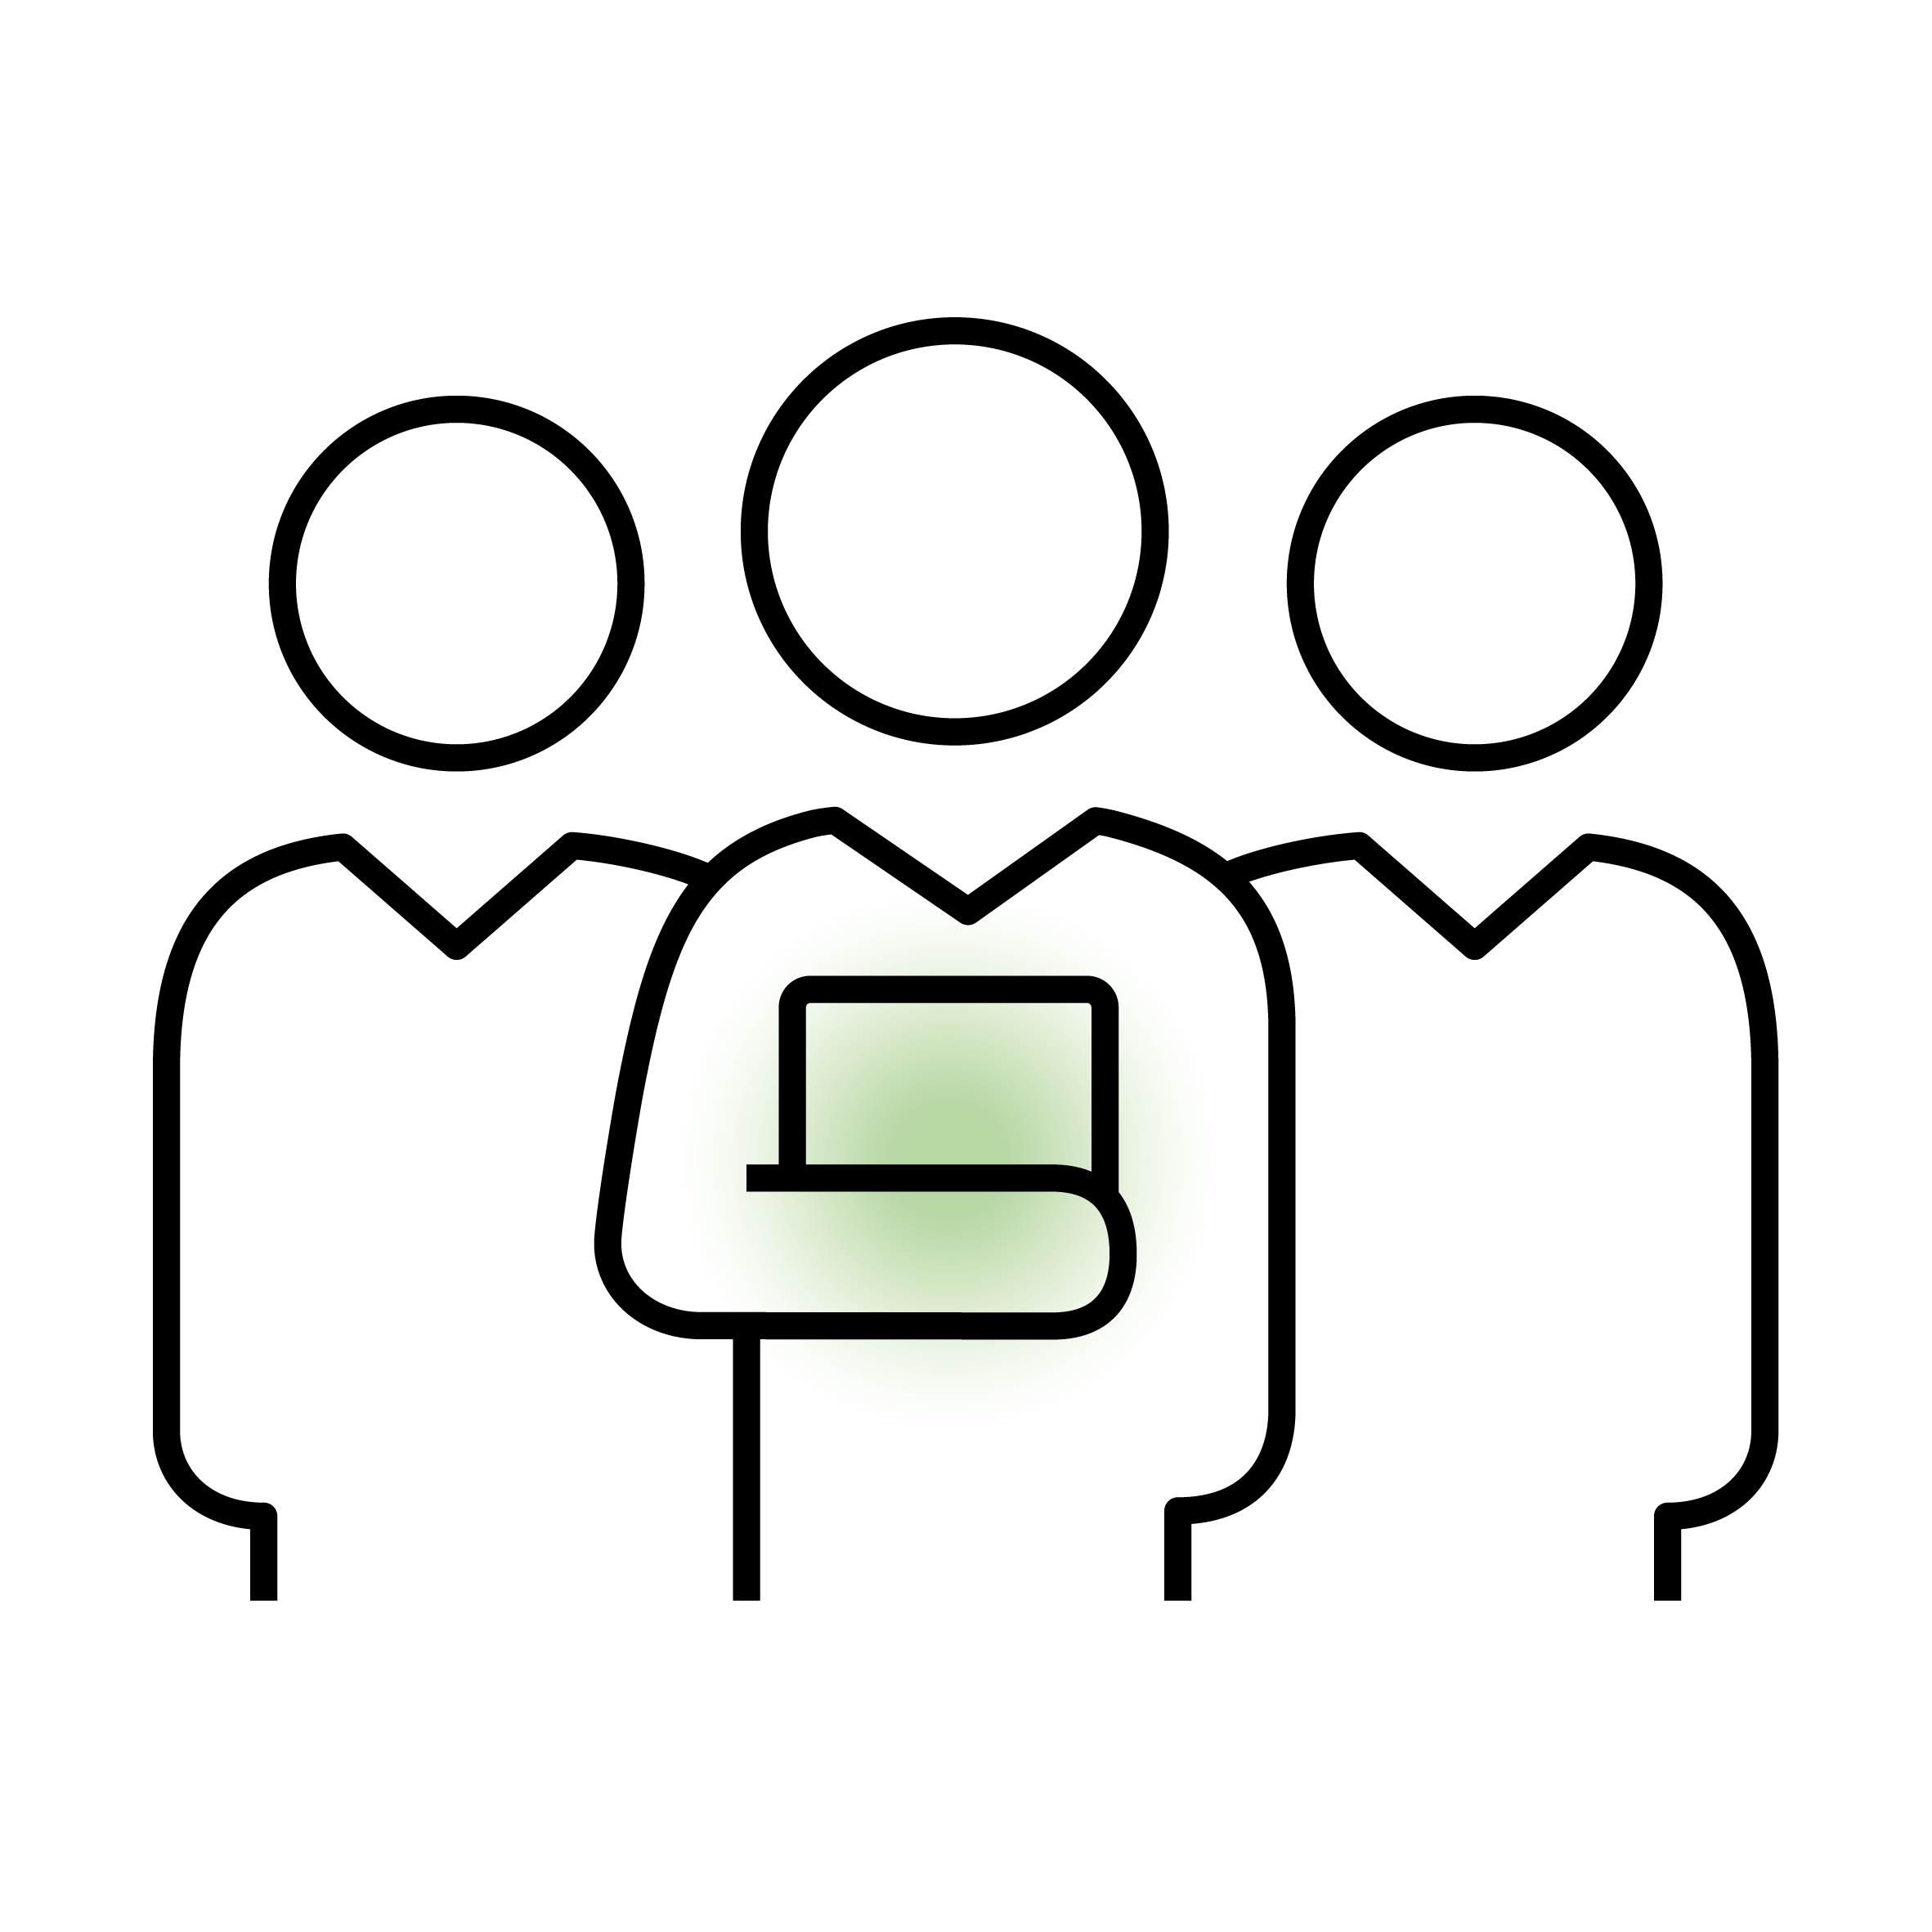 Three stylised people with a laptop symbol.